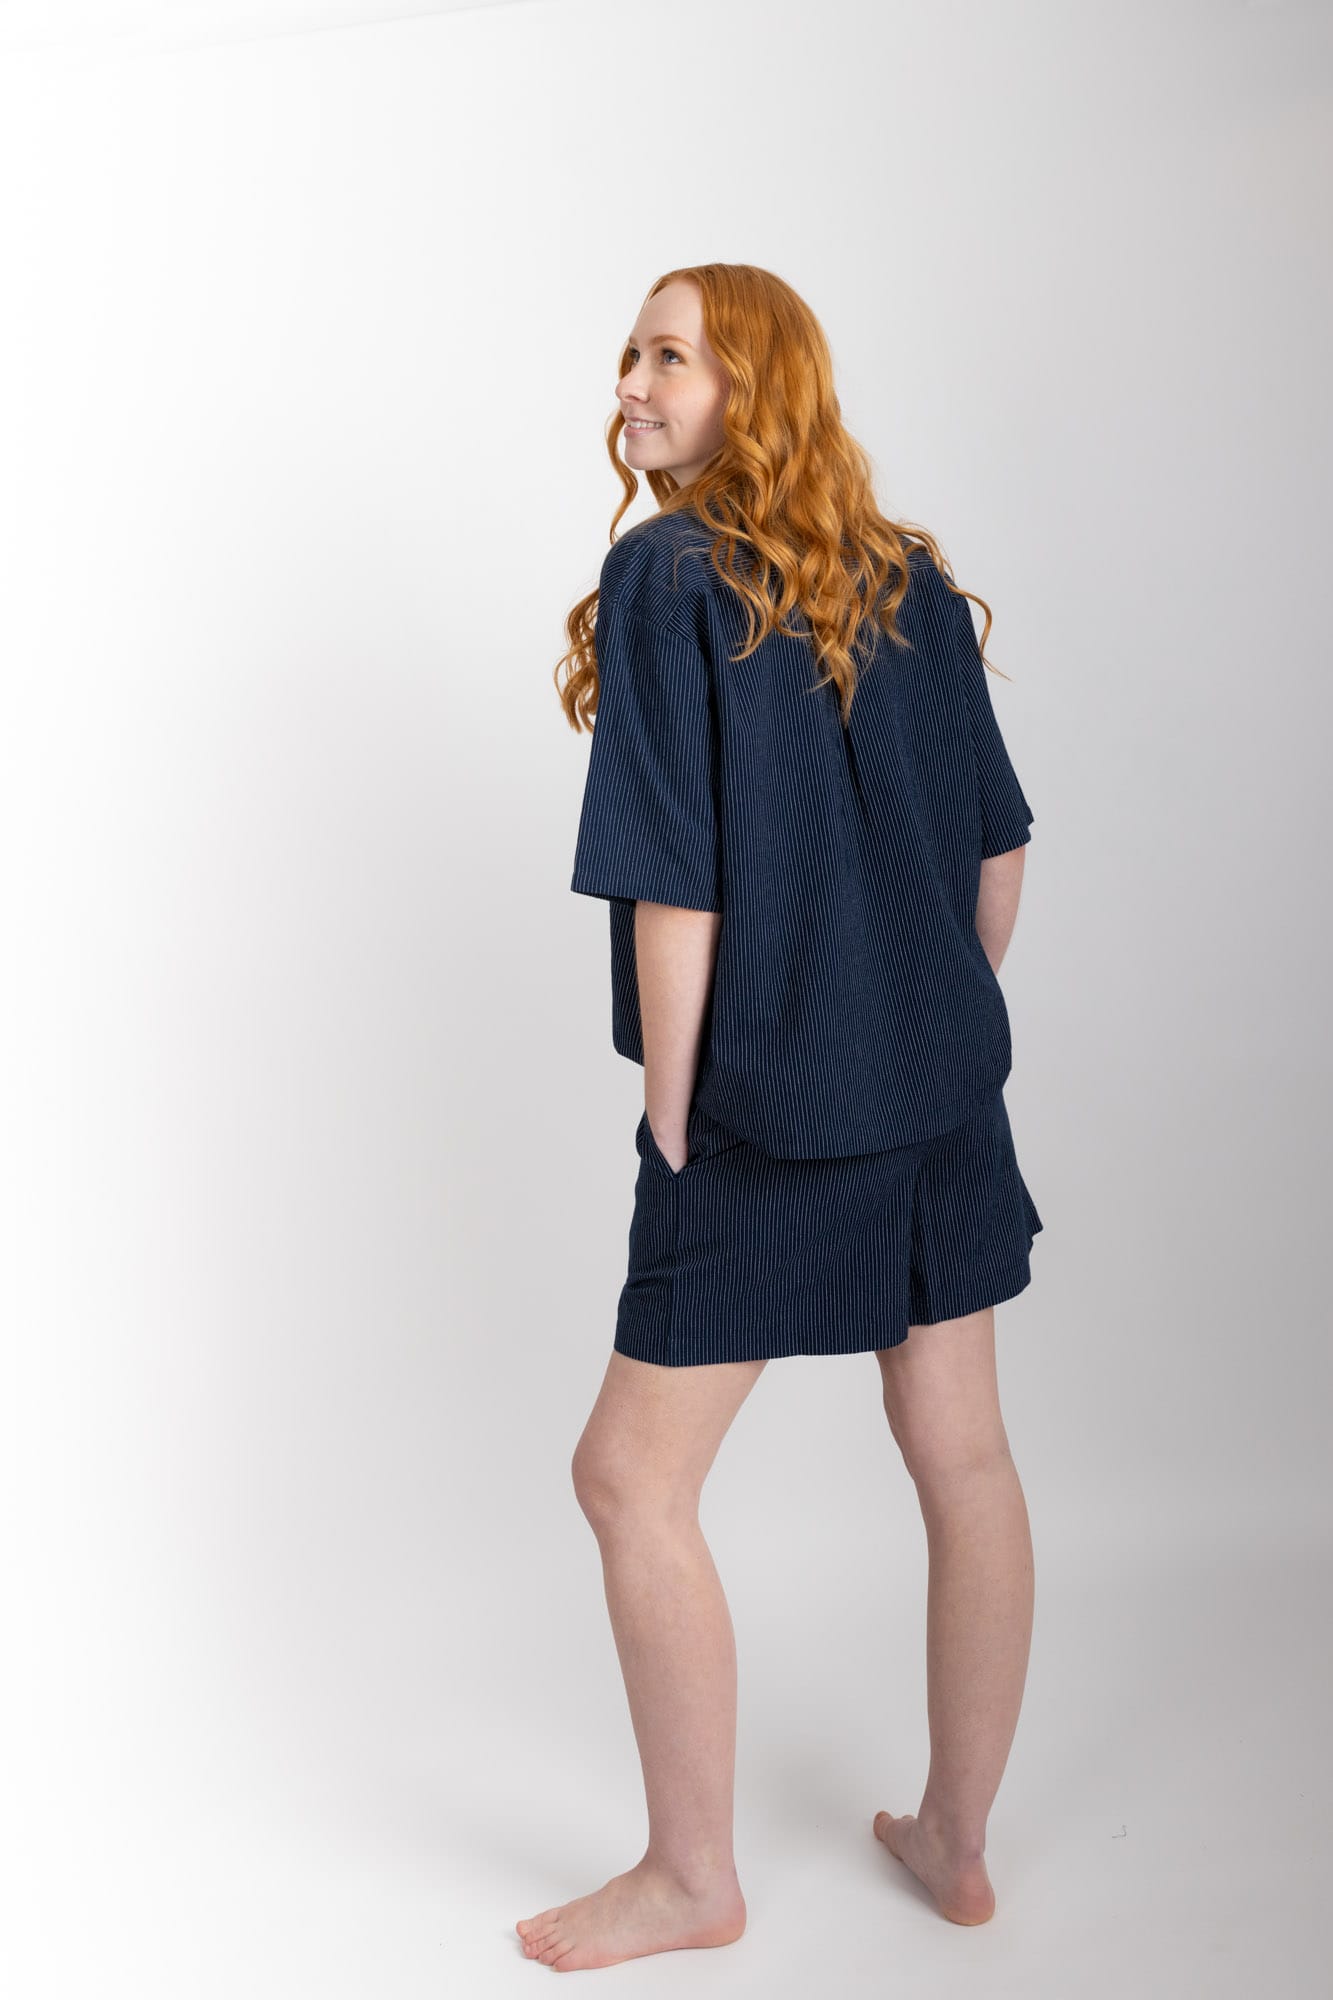 Women’s pyjama set including a short sleeve shirt and shorts. Made from organic cotton, in Navy pinstripe.  The shirt has shell buttons, a front pocket and a back pleat with locker loop detail.  The shorts feature natural shell buttons and an elasticated waistband for comfort.